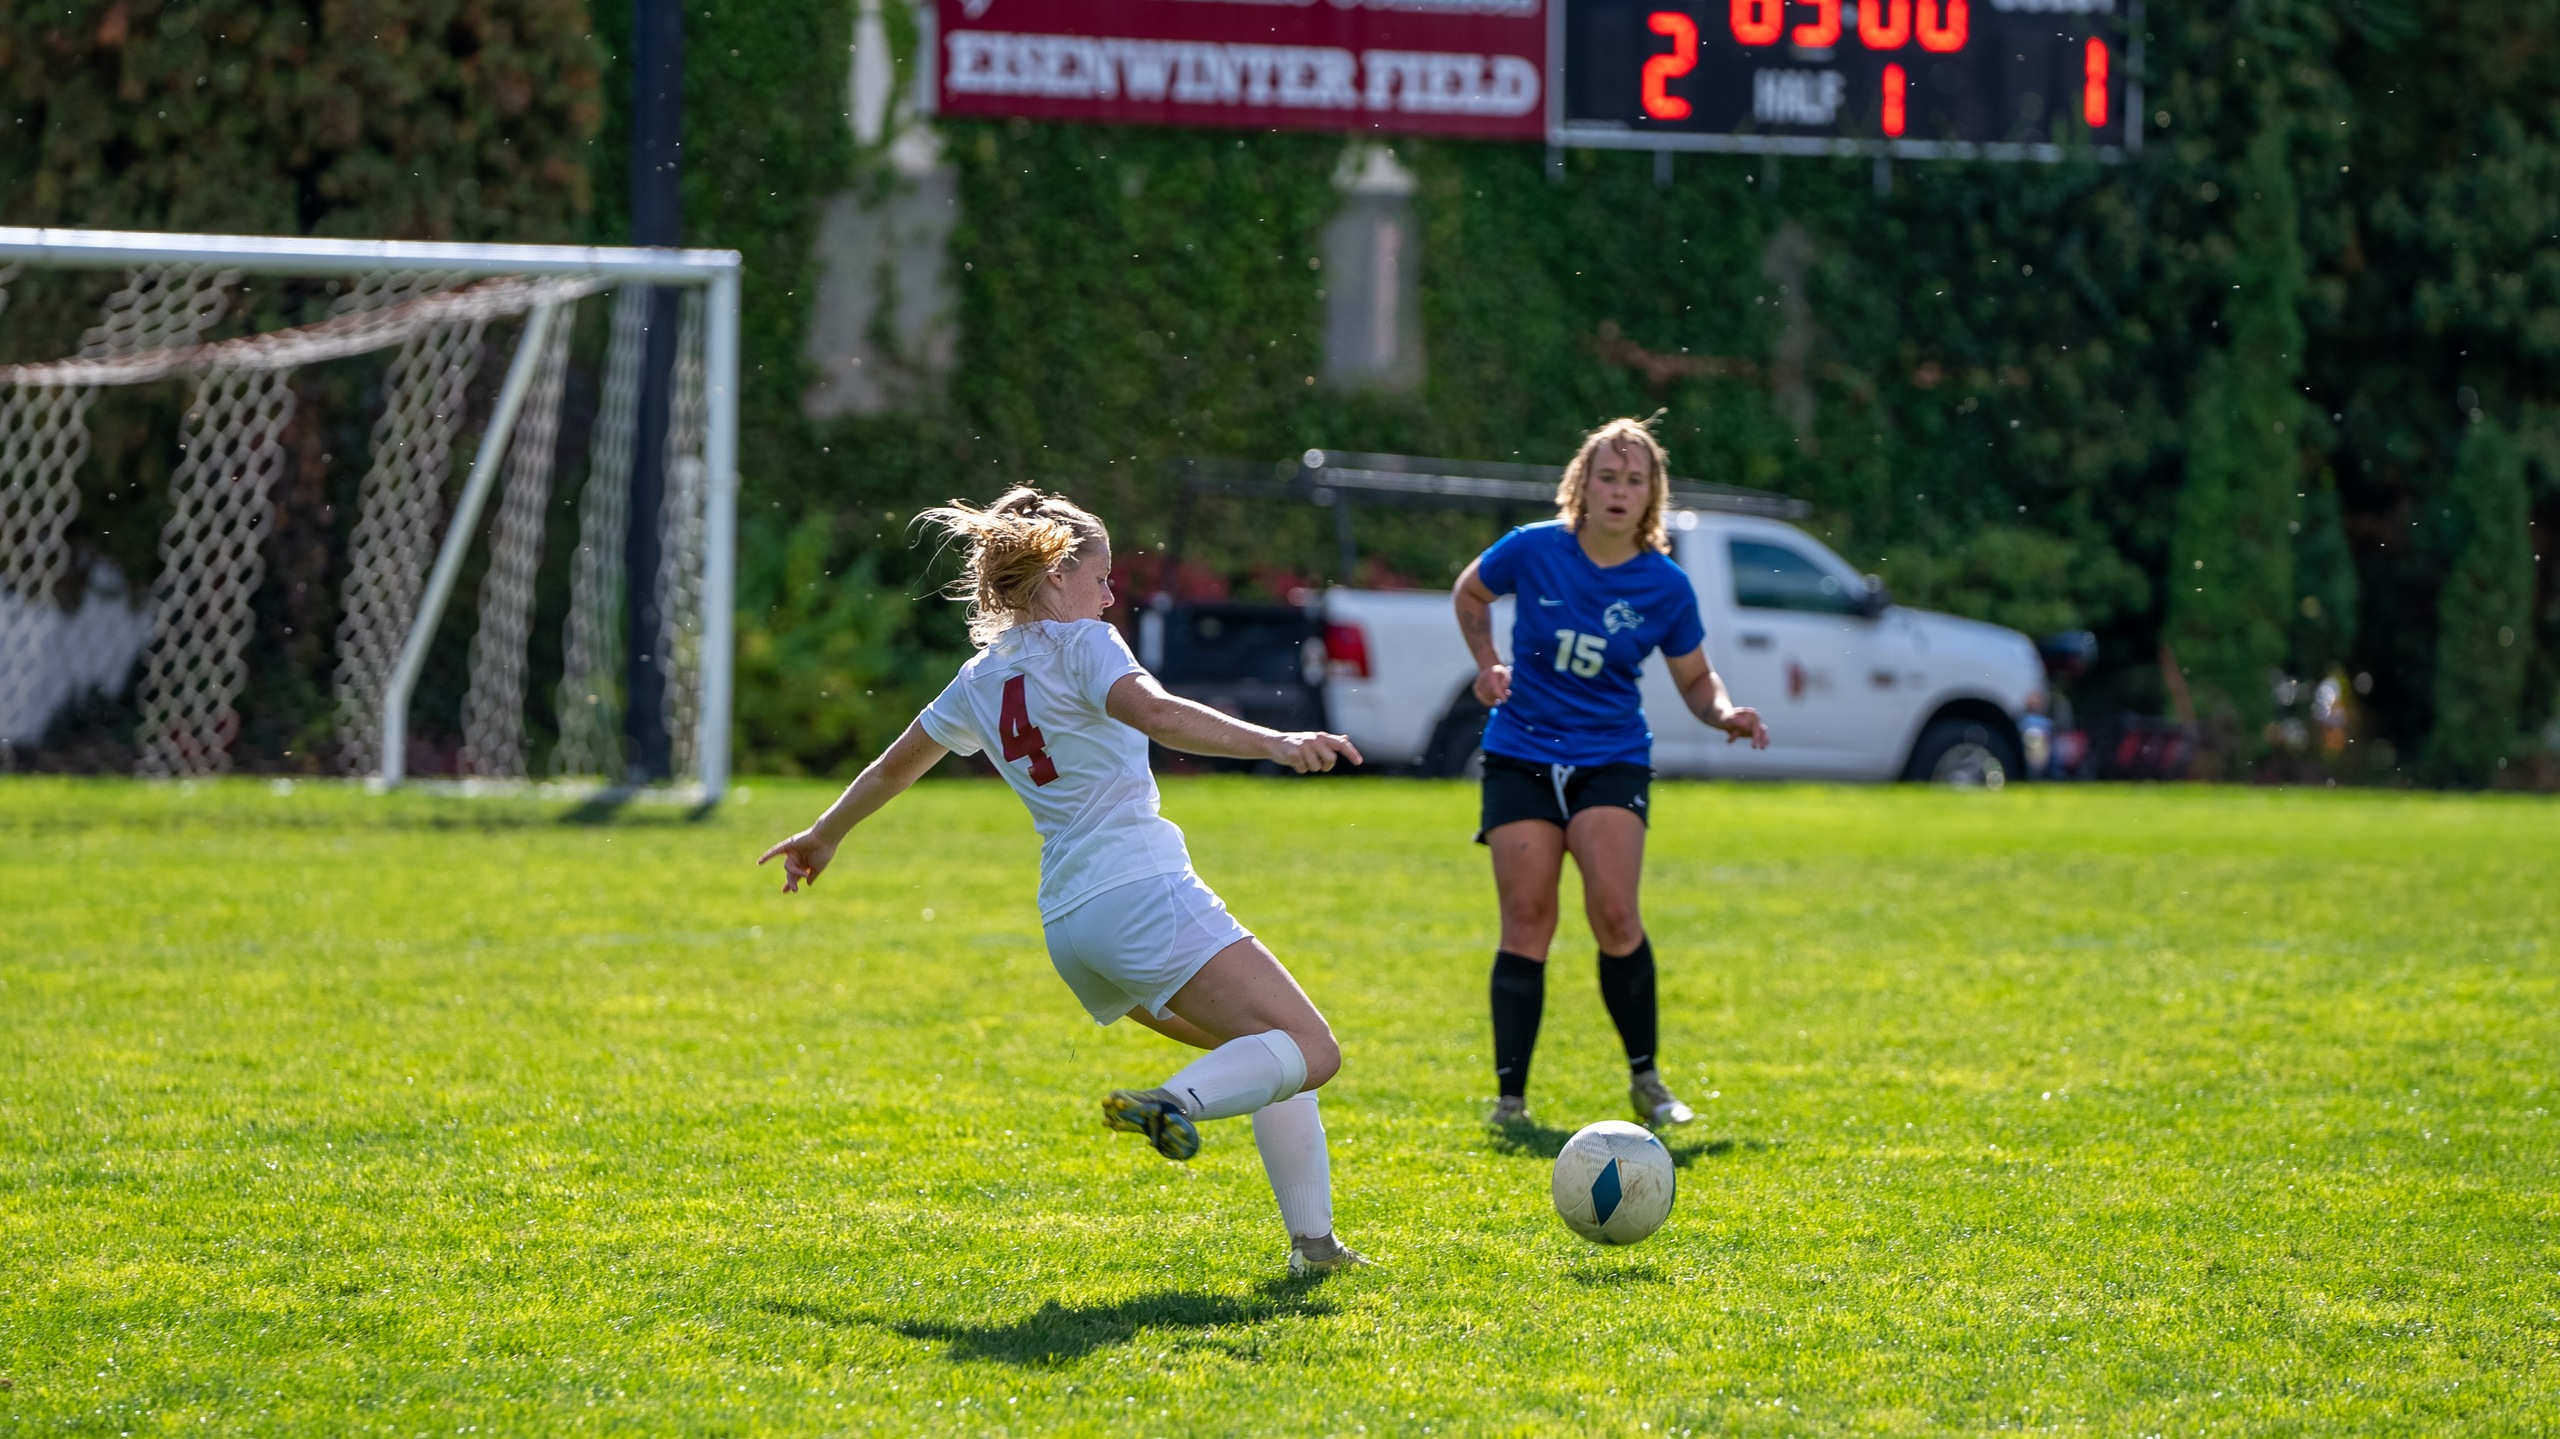 NIC women's soccer player in action.